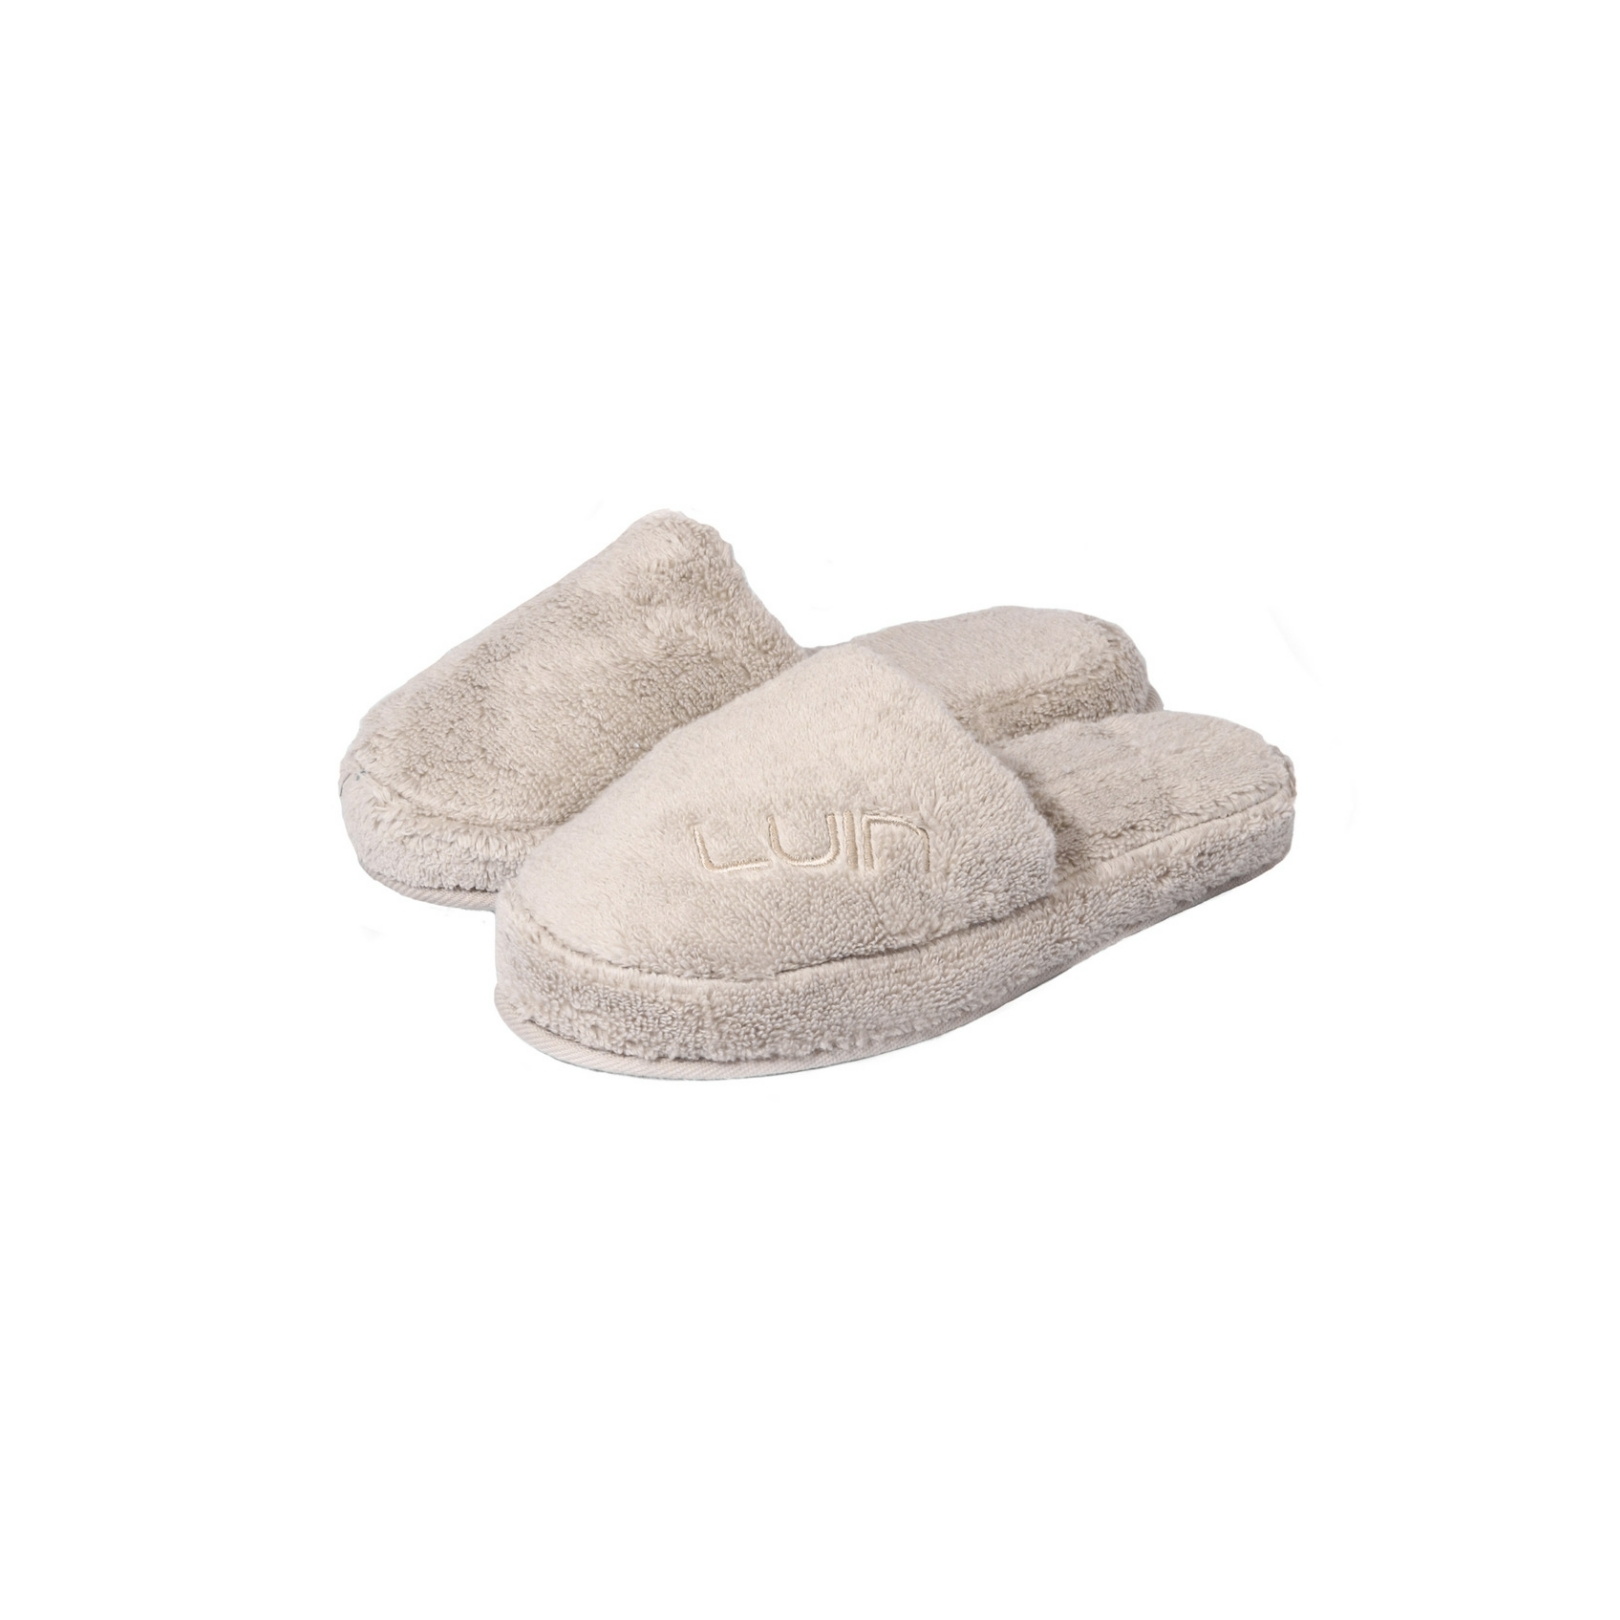 Cosy bath slippers L/XL 41-44 sand Luin Living Your Home Your Spa